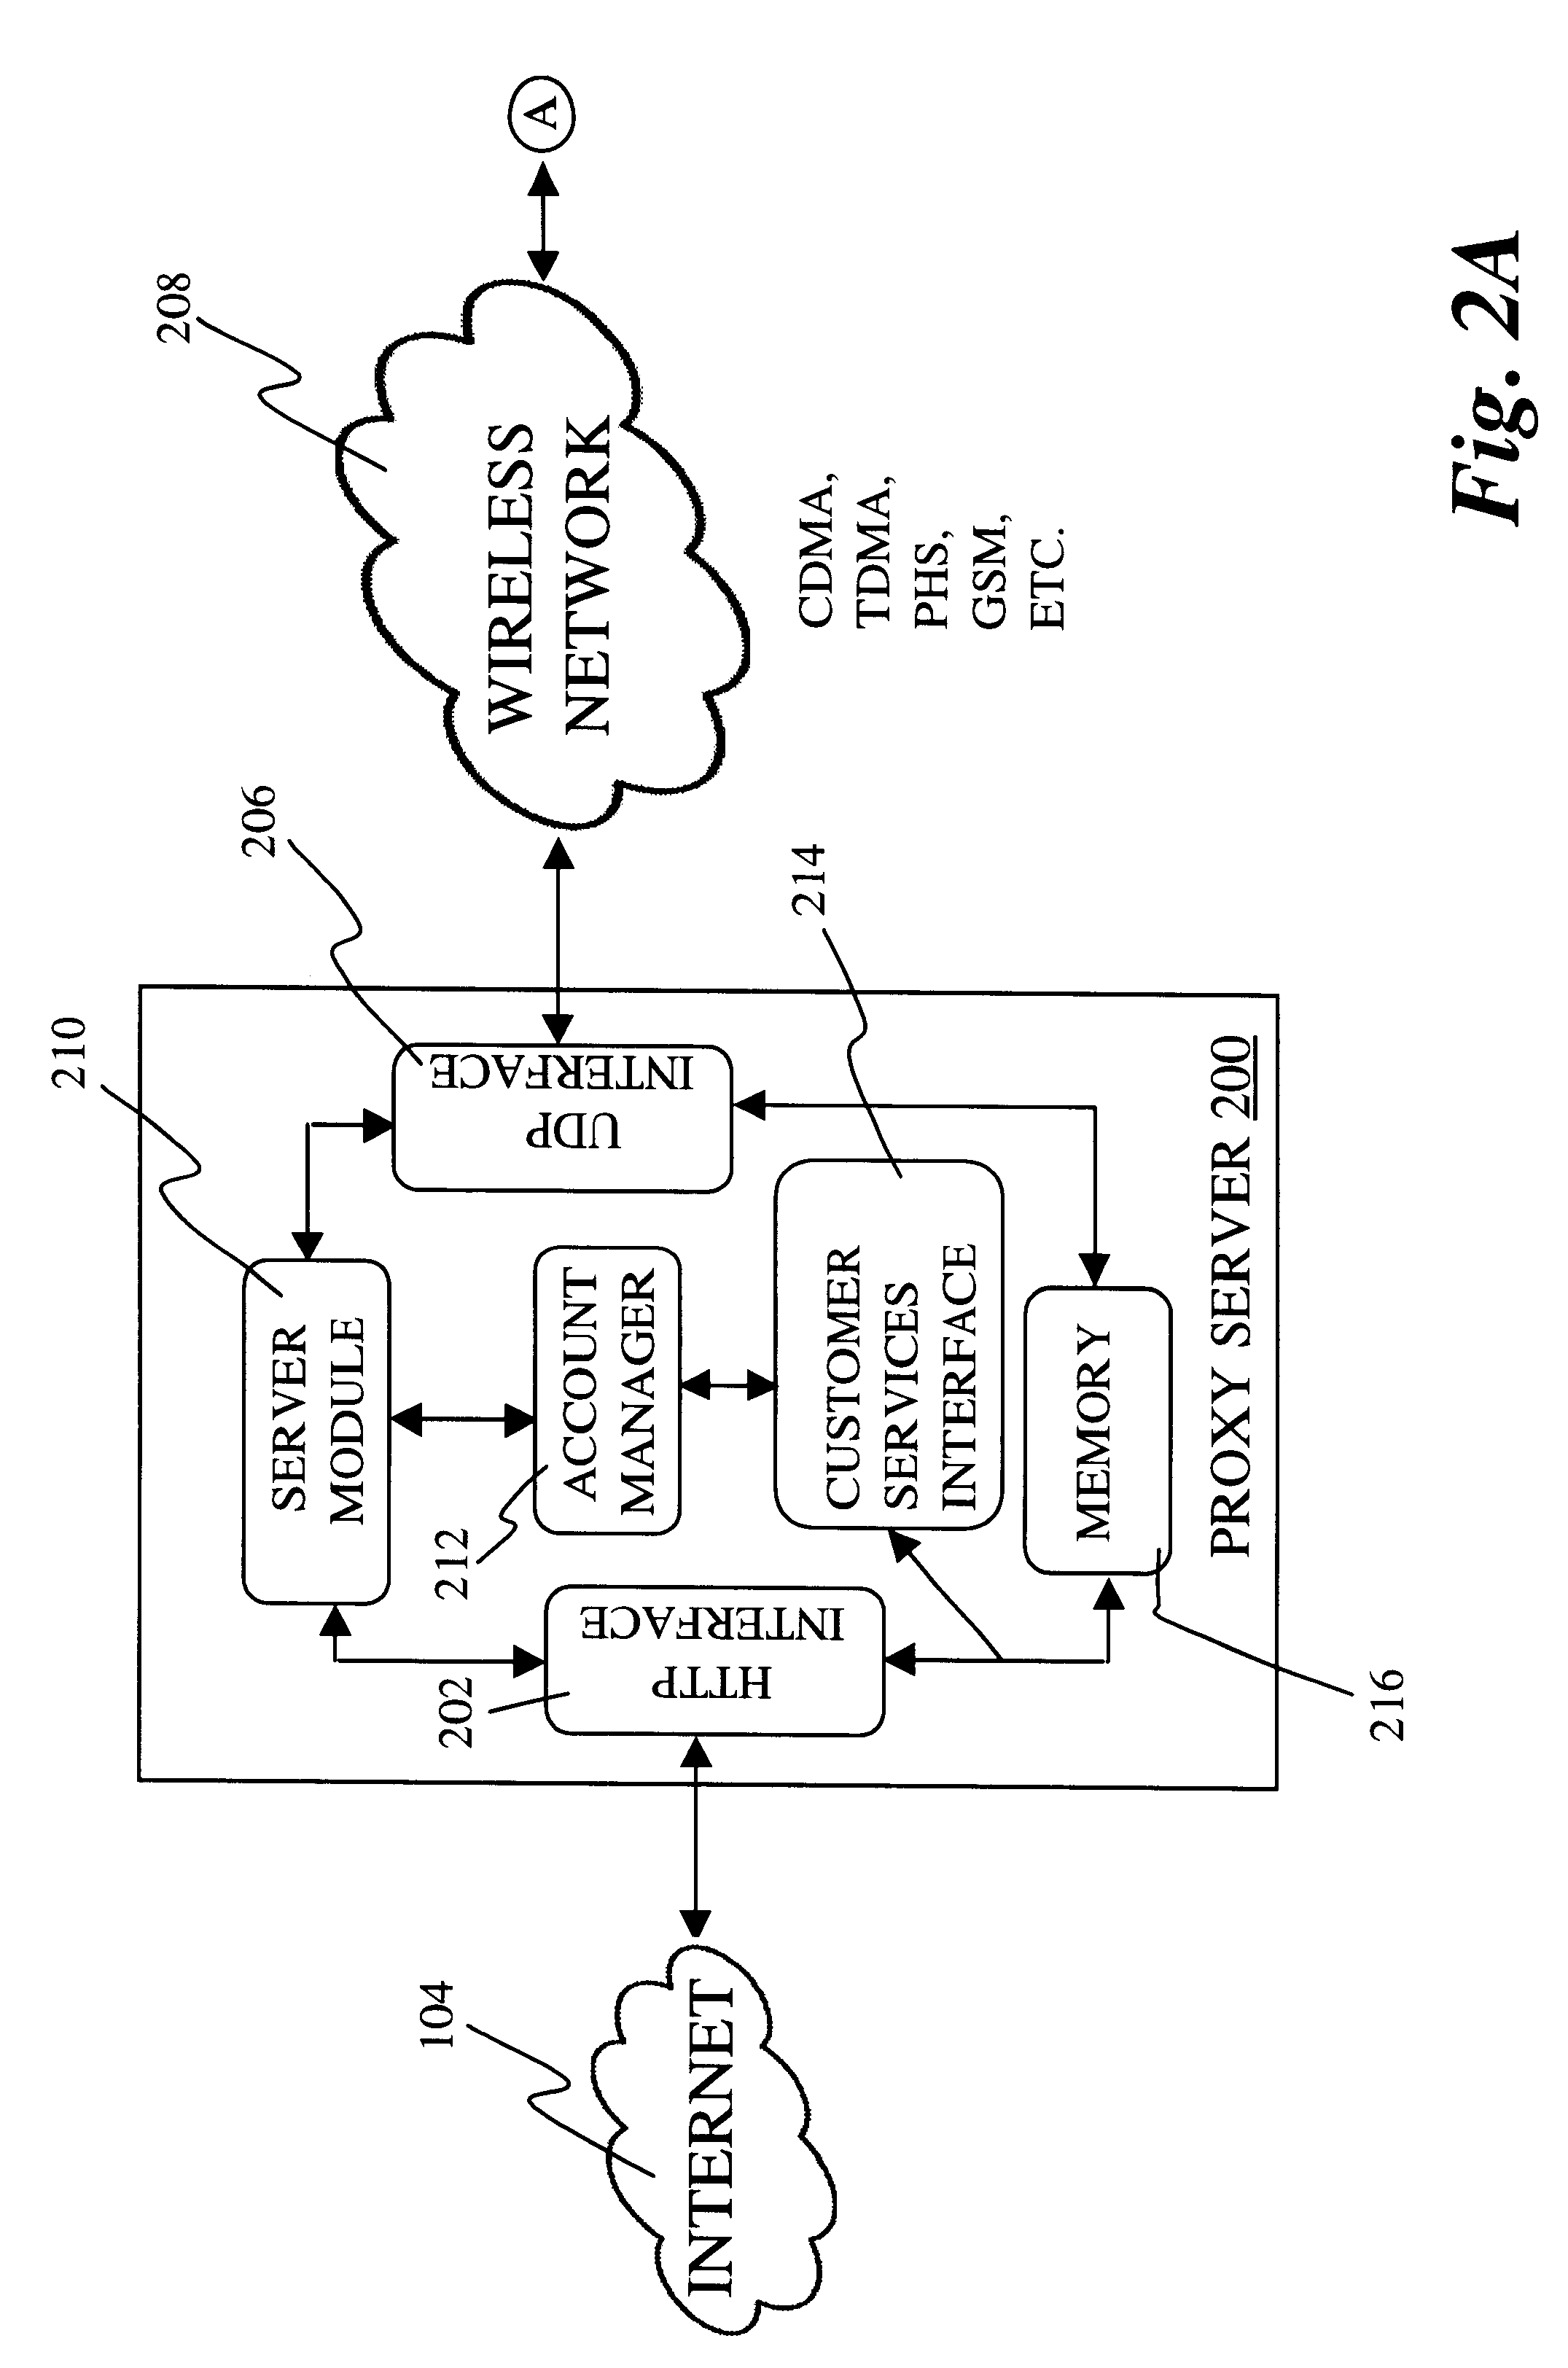 Visual interface to mobile subscriber account services